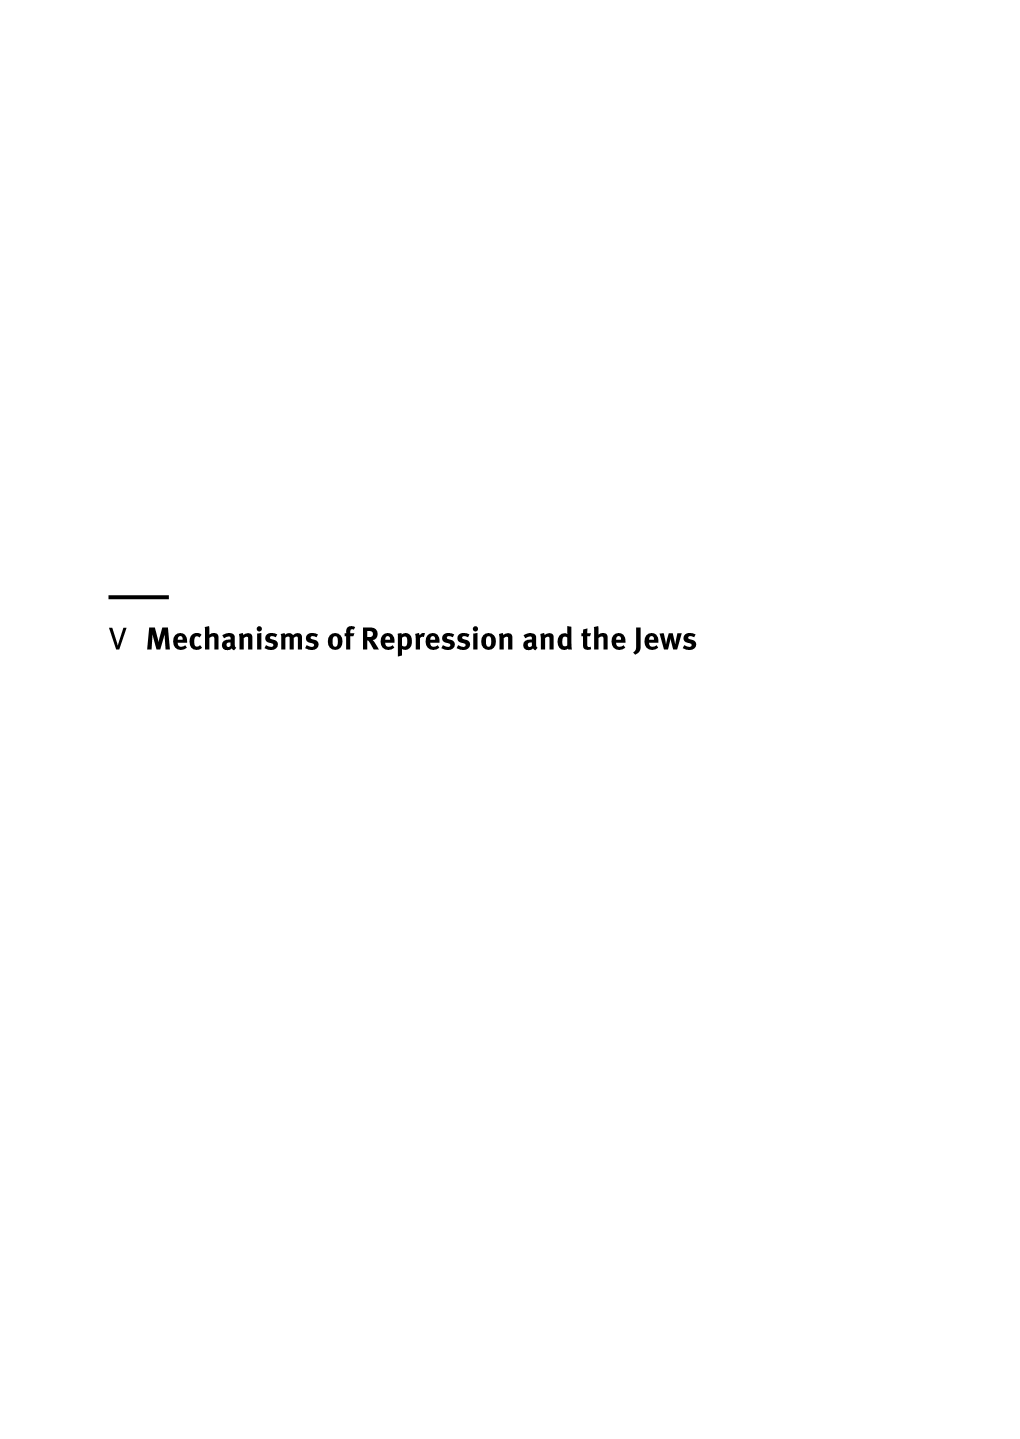 V Mechanisms of Repression and the Jews